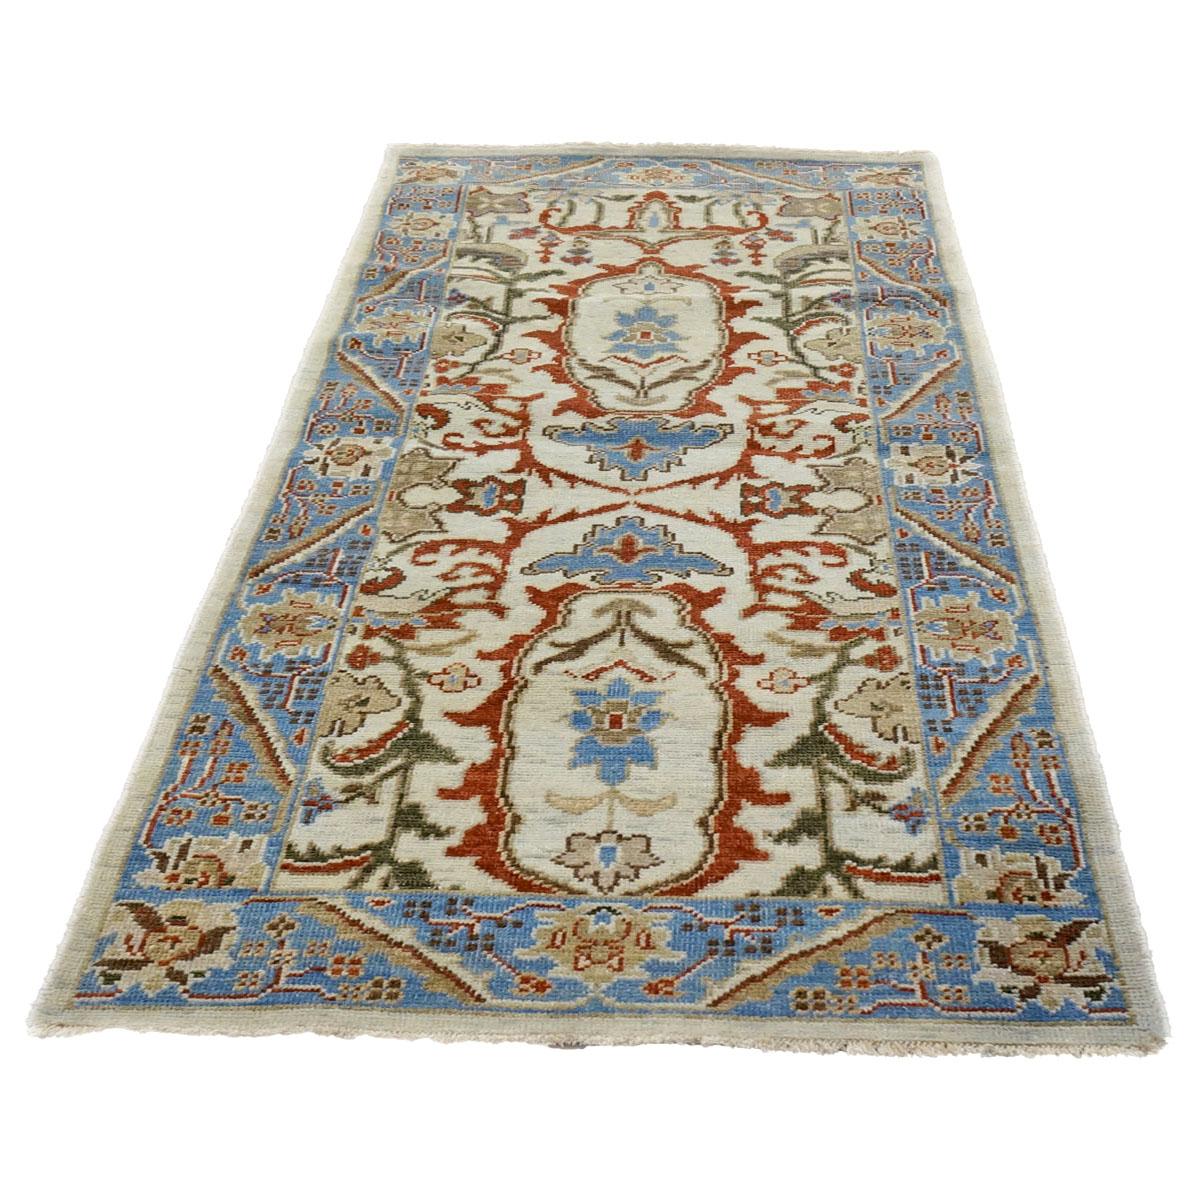 Ashly Fine Rugs presents an antique recreation of an original Persian Sultanabad hall runner. Part of our own previous production, this antique recreation was thought of and created in-house and 100% handmade in Afghanistan by master weavers.